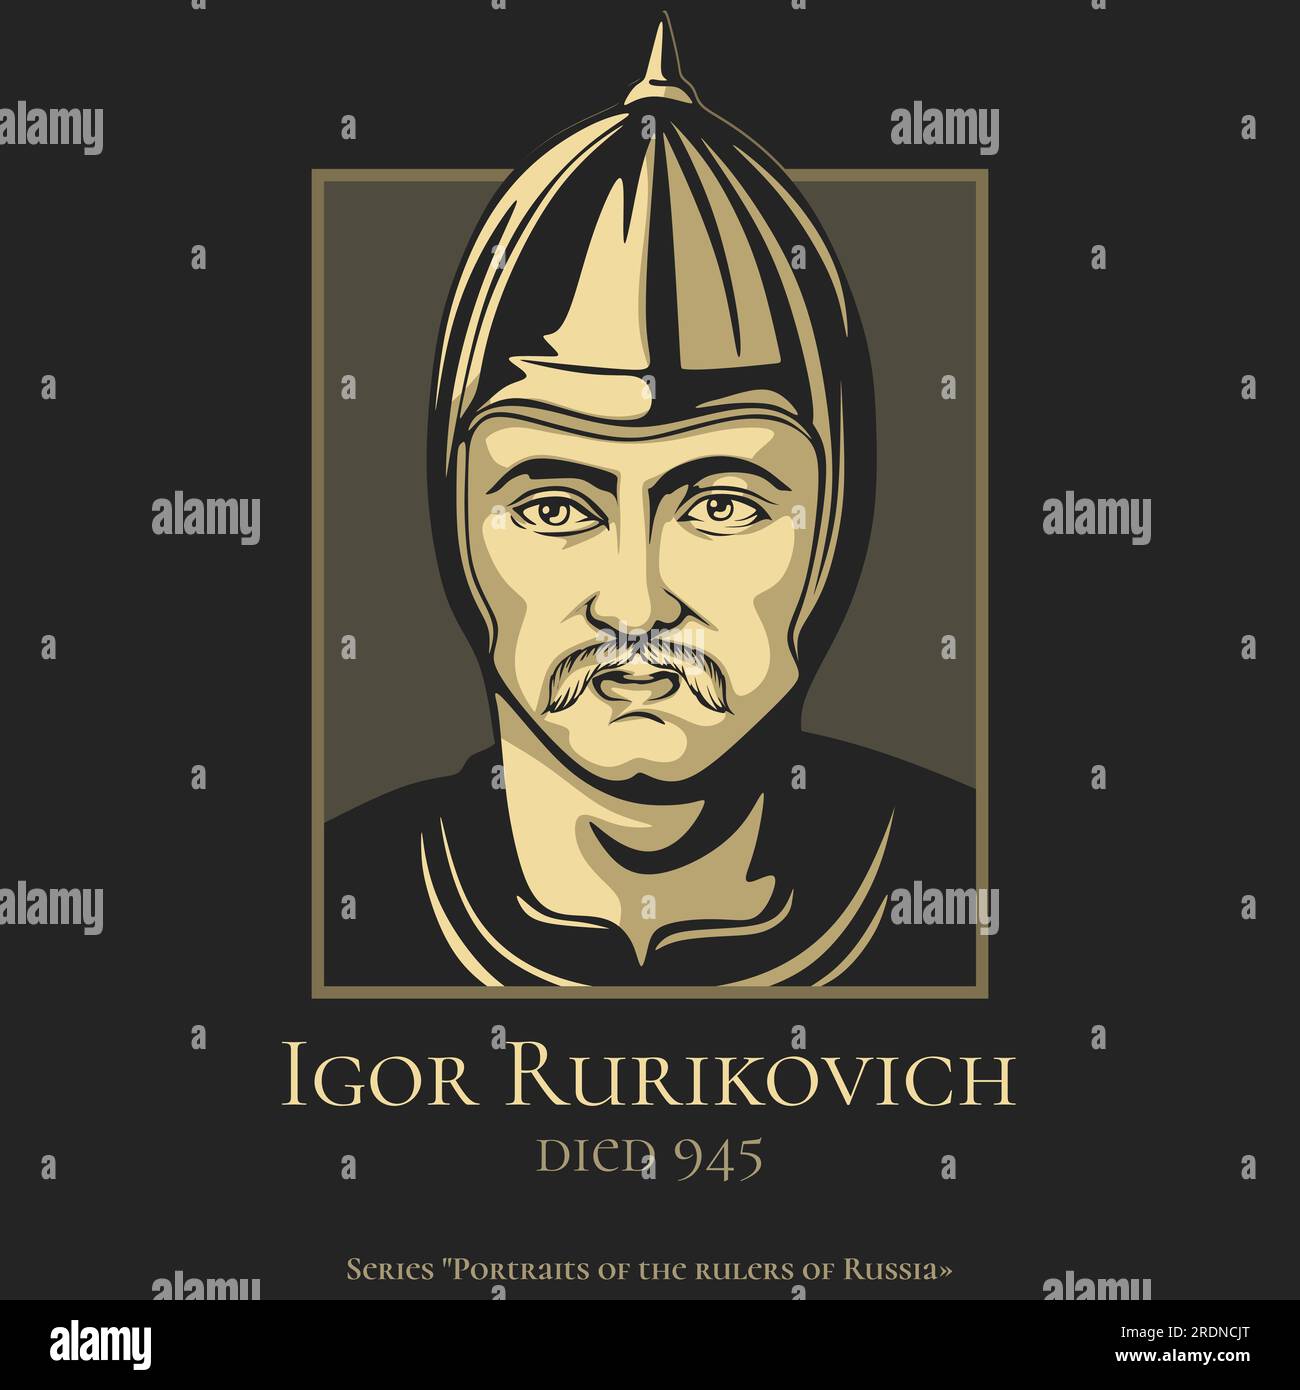 Portrait of the rulers of Russia. Igor Rurikovich (died 945) was a Rurikid ruler of Kievan Rus' from 912 to 945. Stock Vector